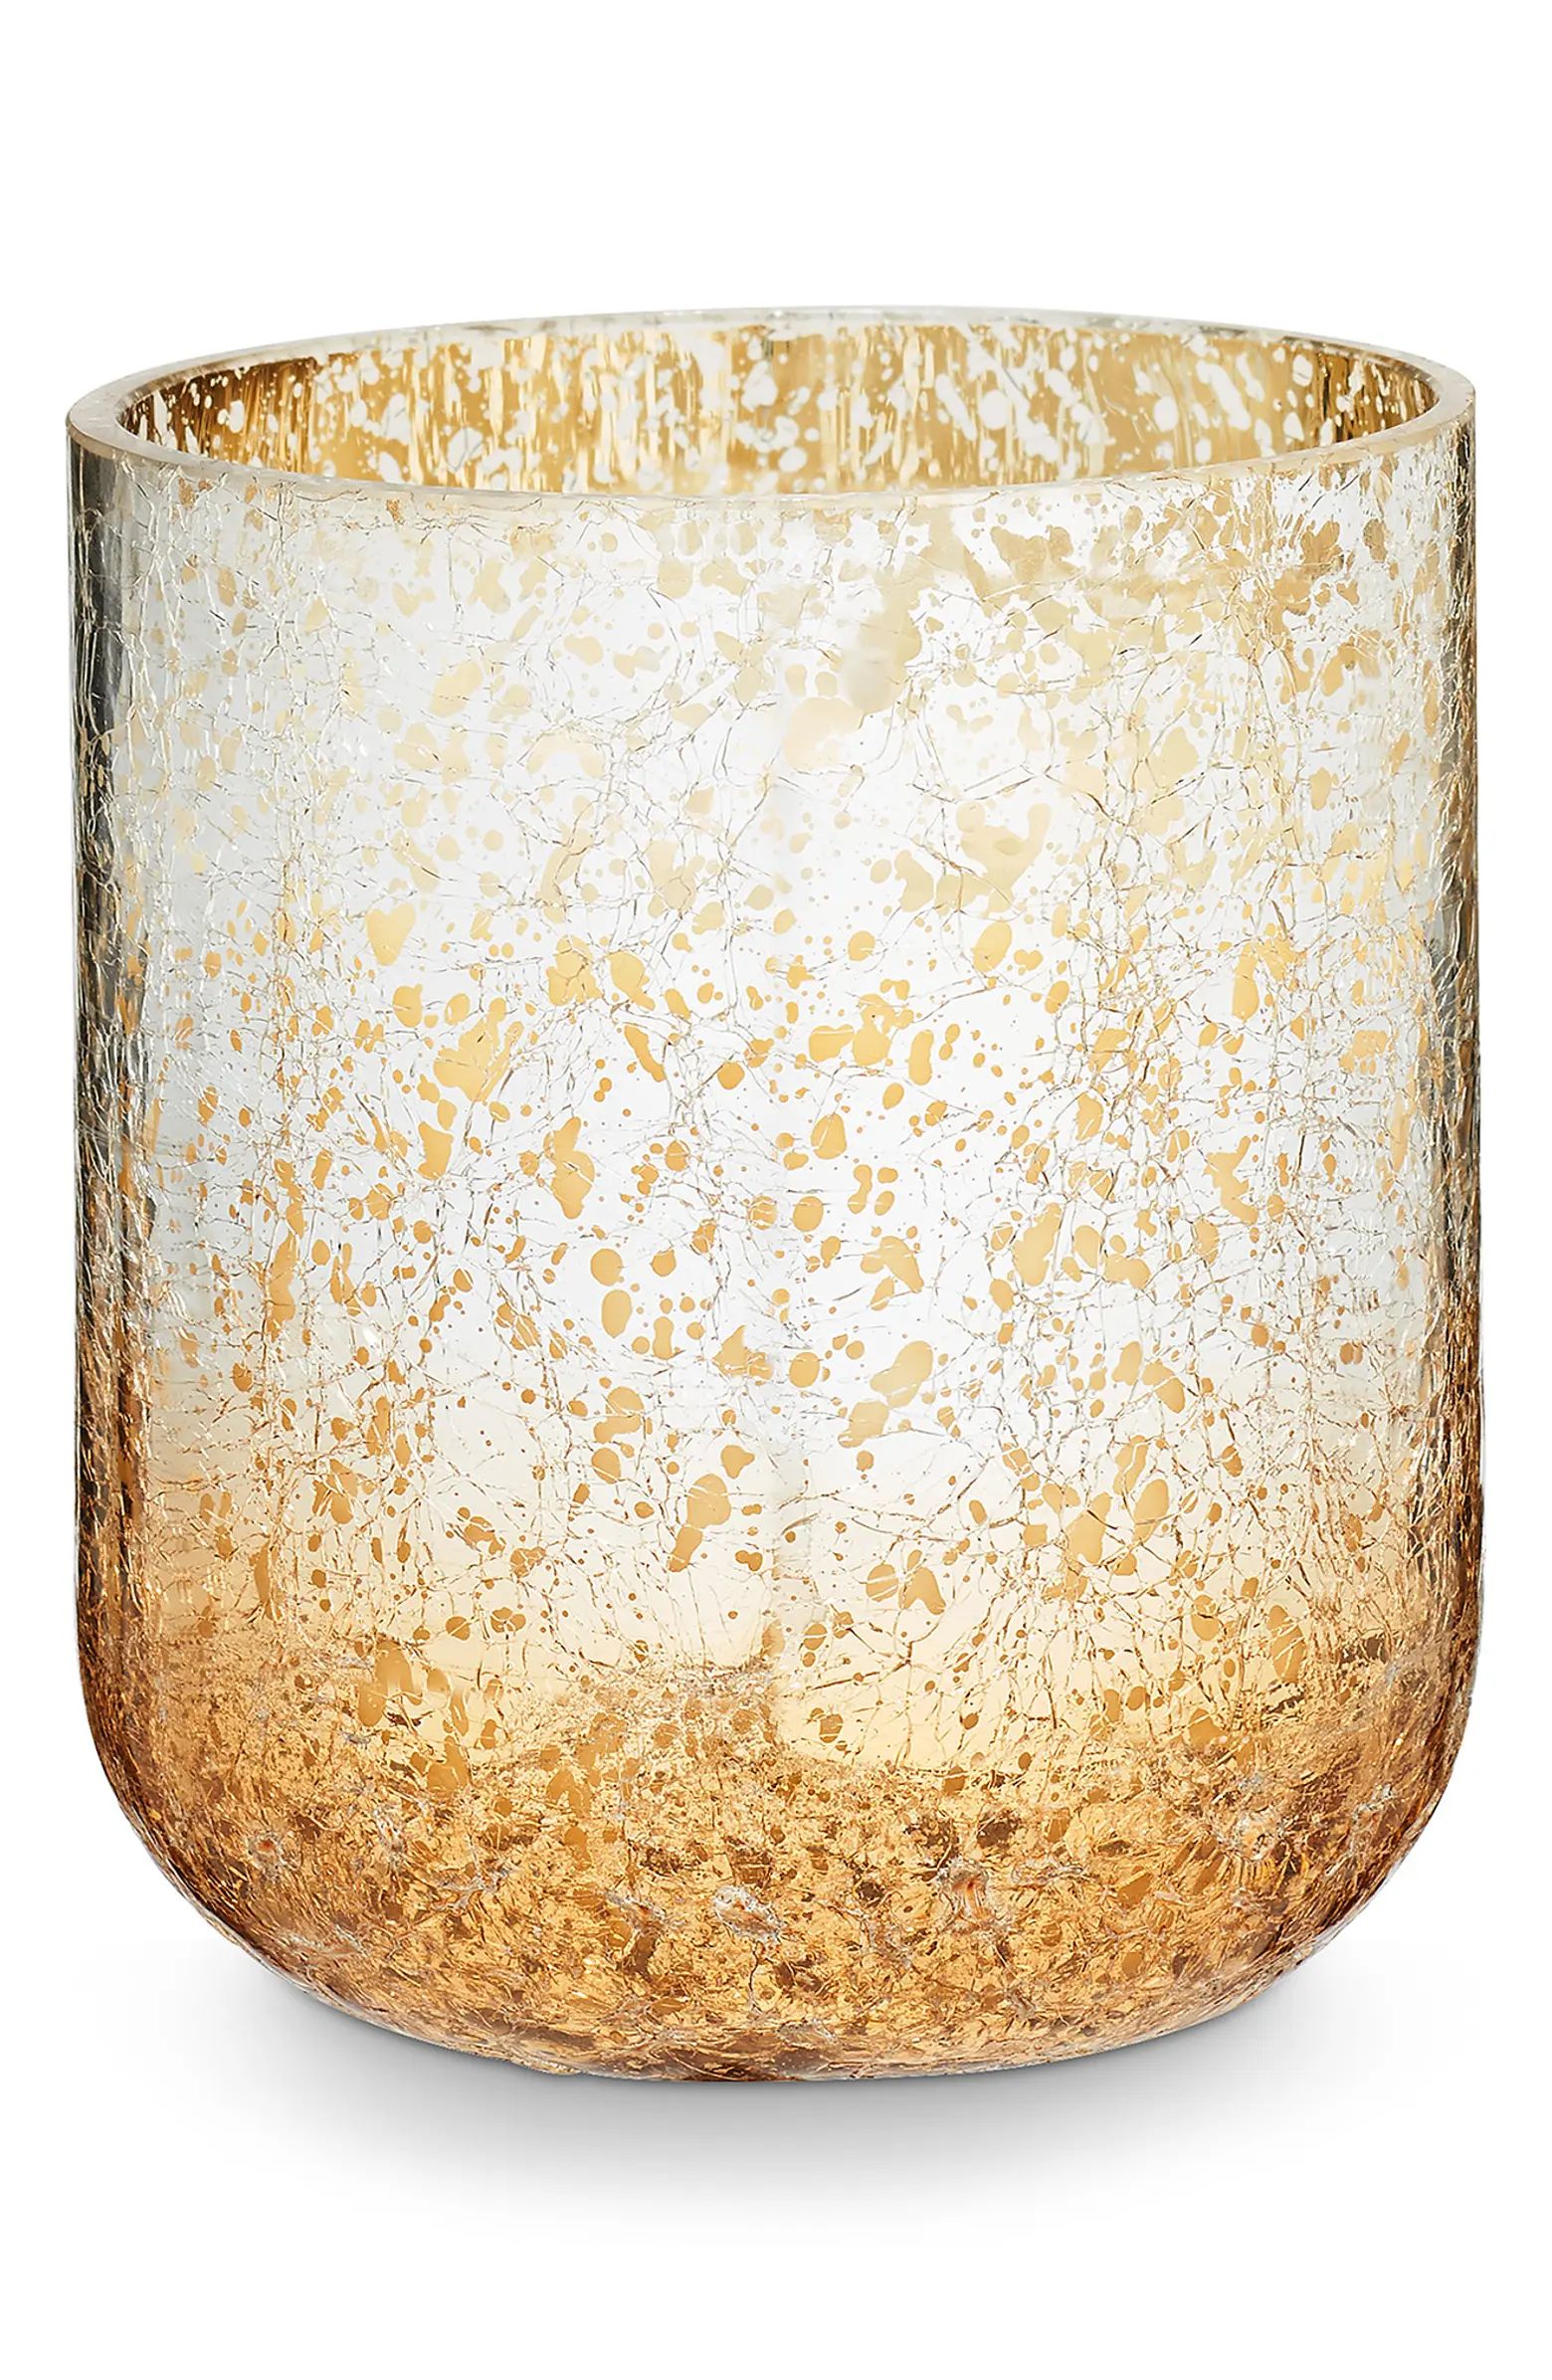 ILLUME® Balsam Cedar Small Crackle Glass Candle | Nordstrom | Nordstrom